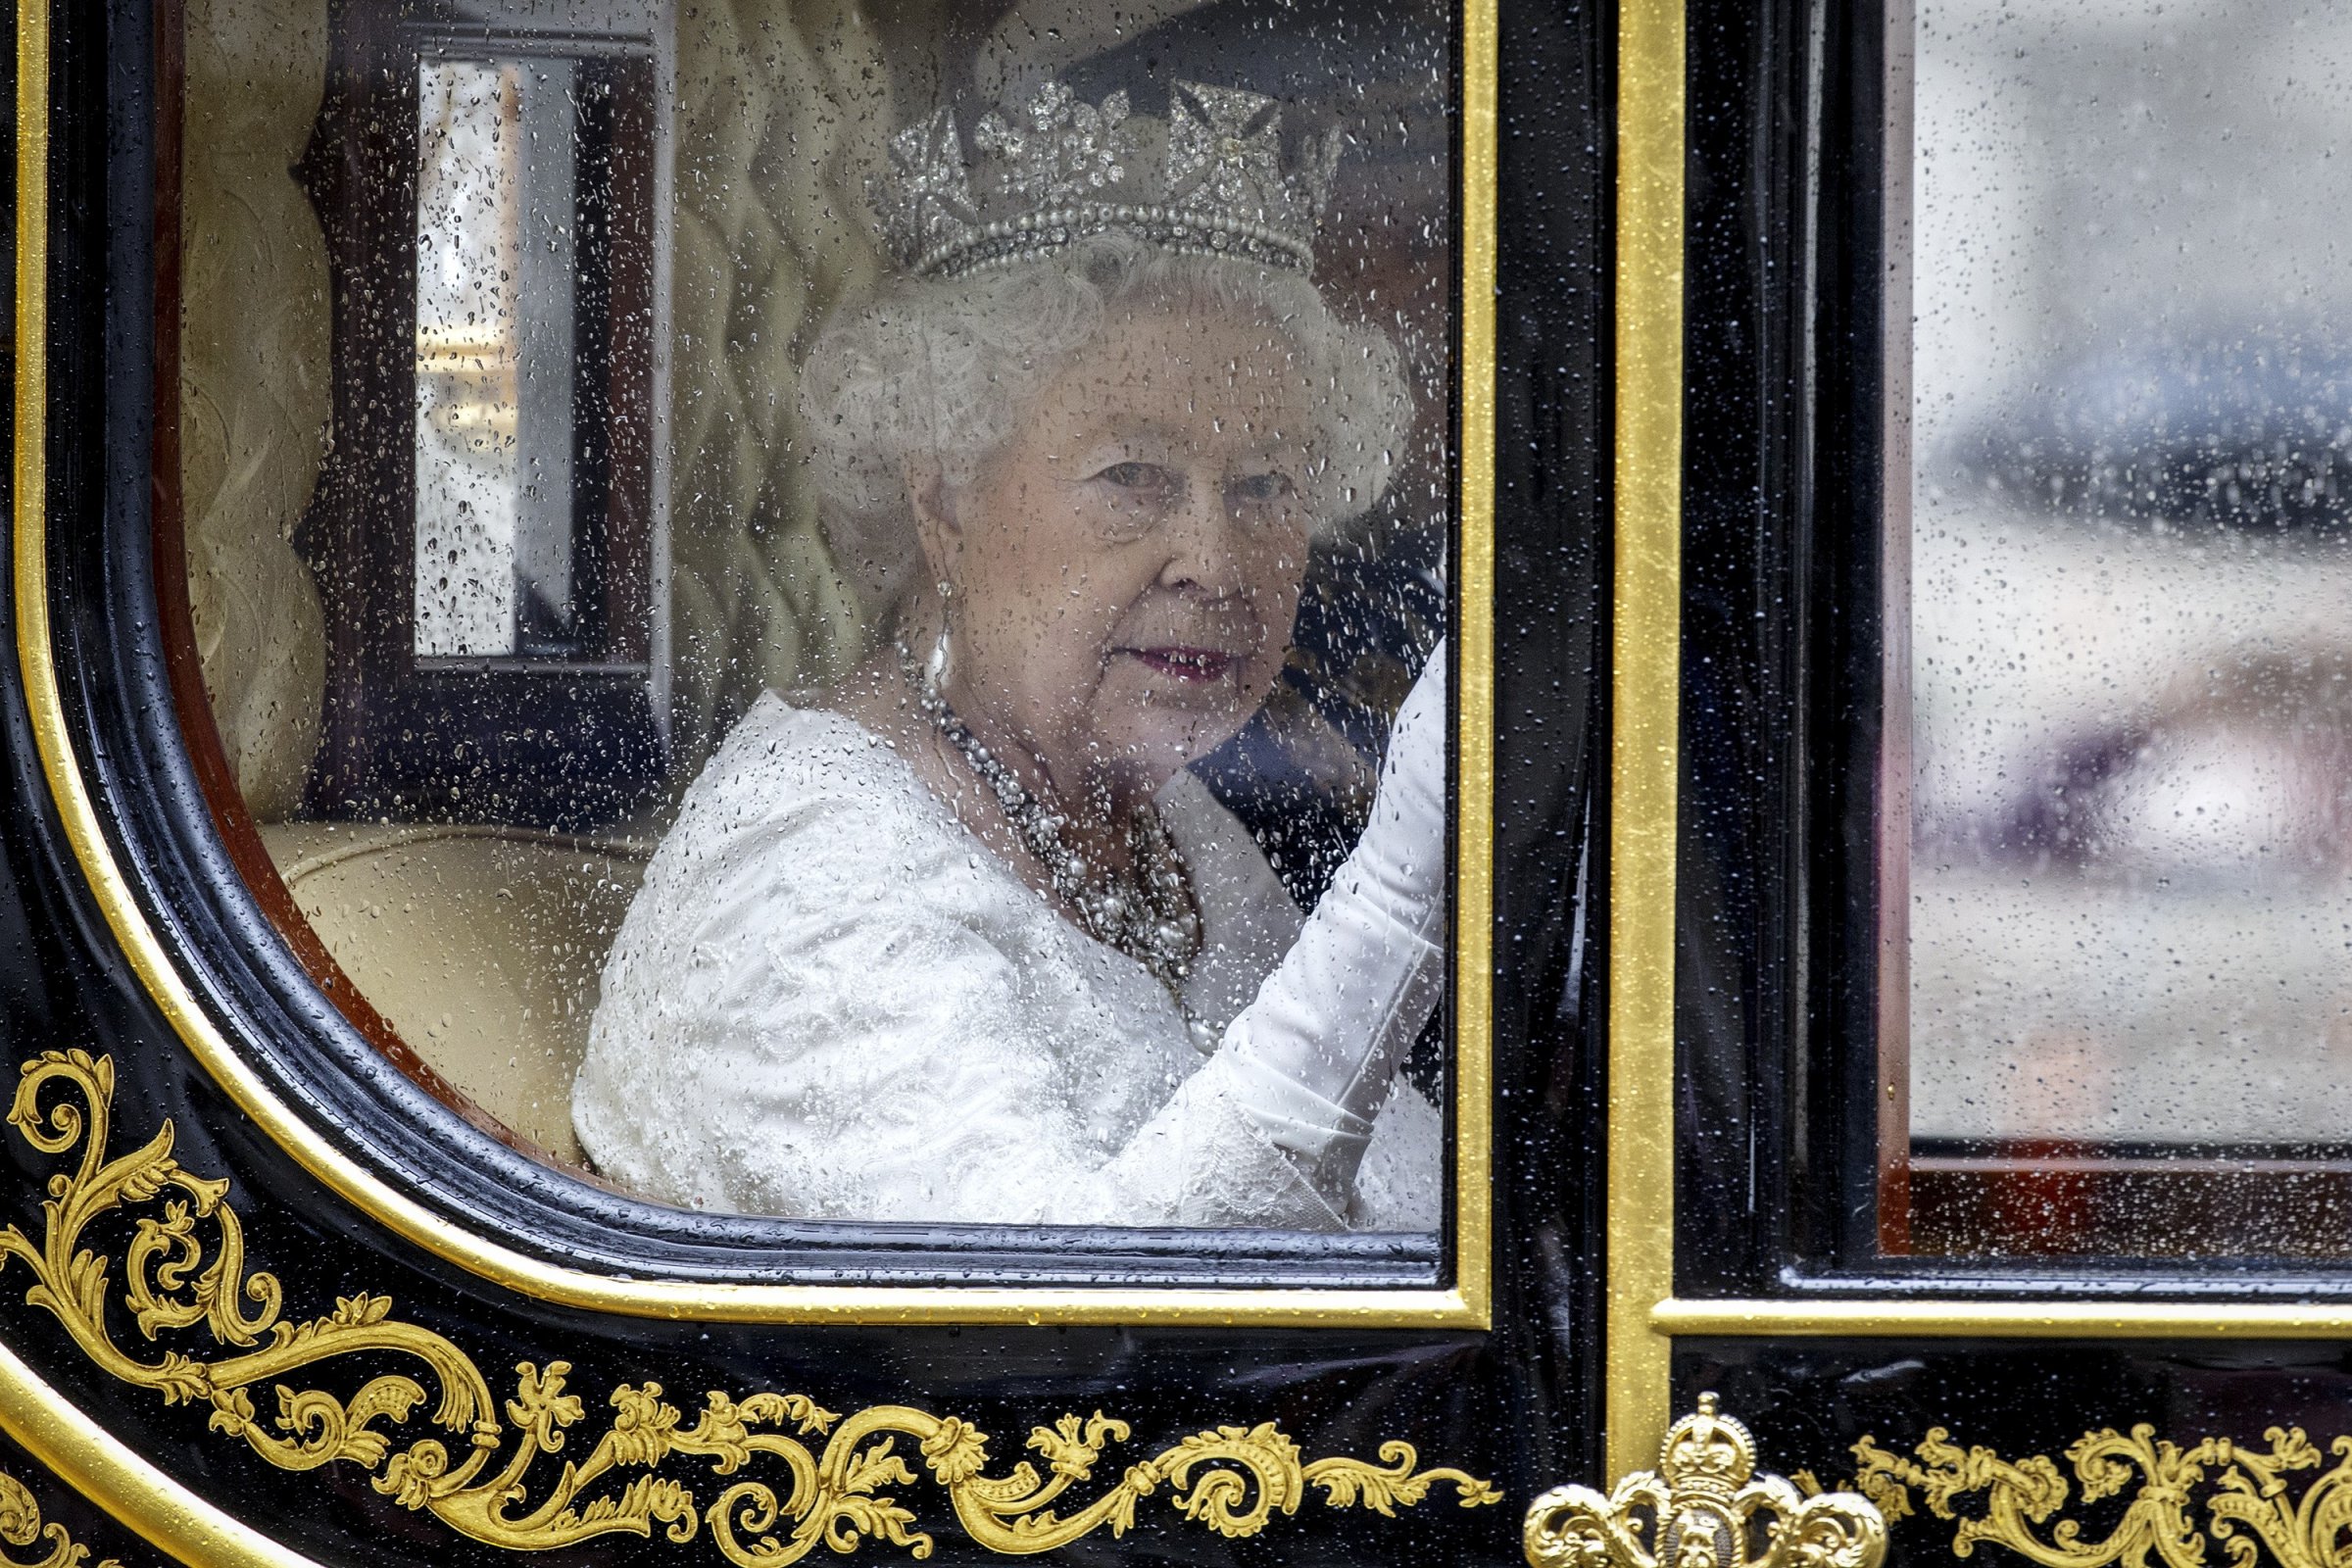 Britain's Queen Elizabeth II travels from the Houses of Parliament to Buckingham Palace after the Queen addressed the State Opening of Parliament in London, England on May 18, 2016.